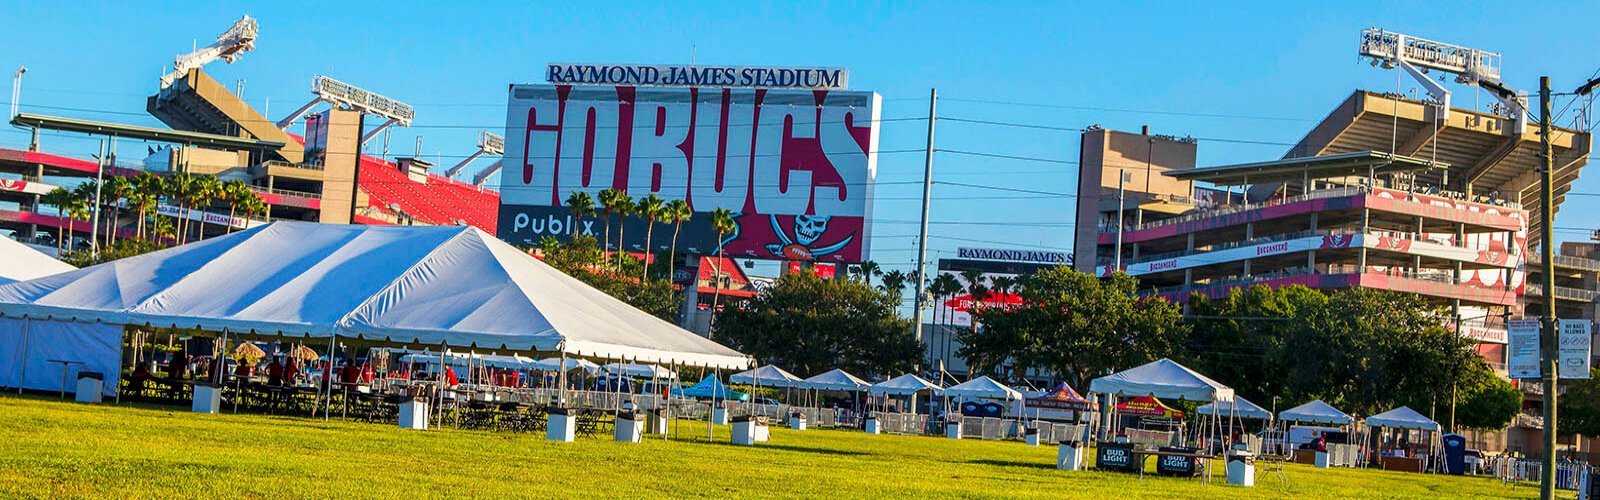 The Bullard Family Foundation's sixth annual Back to School Bash at Raymond James Stadium provided community members and school kids free backpacks filled with school supplies, free medical, dental and vision services and complimentary haircuts.